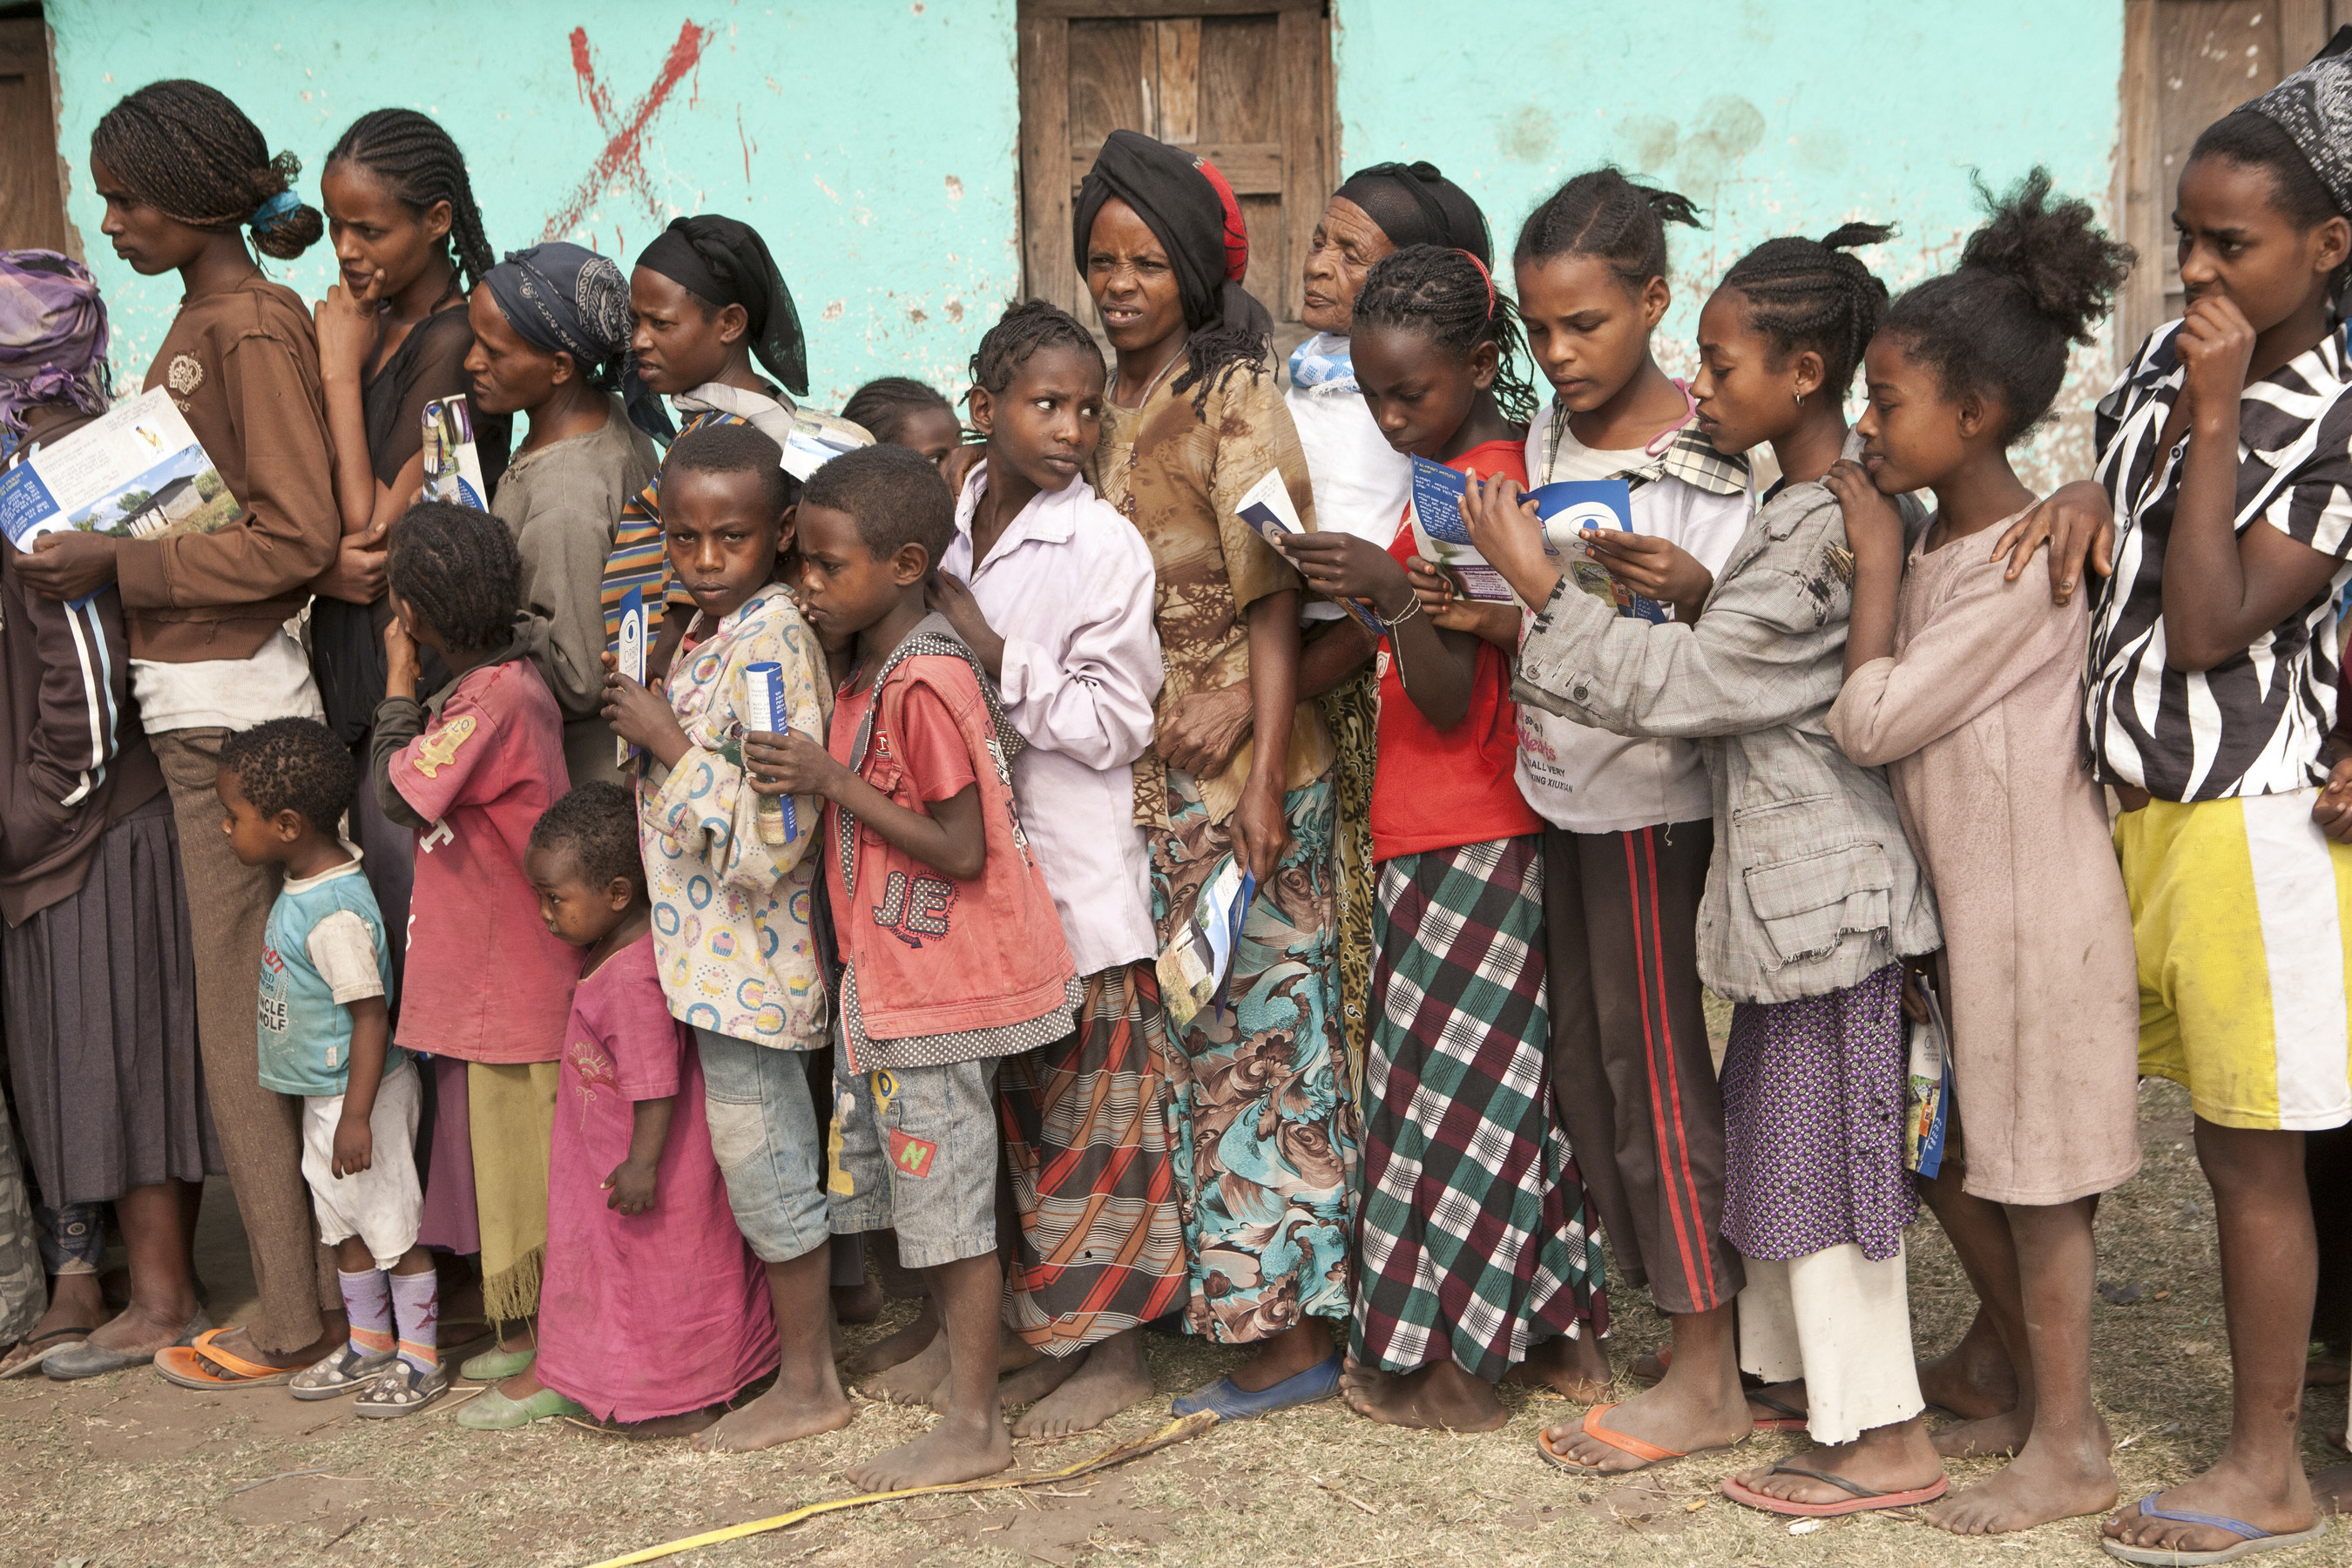 Patients in the Adilo Village, Ethiopia line up for a mass distribution of Zithromax, a drug that treats an infectious eye disease prevalent in their area. Learn more: orbis.org